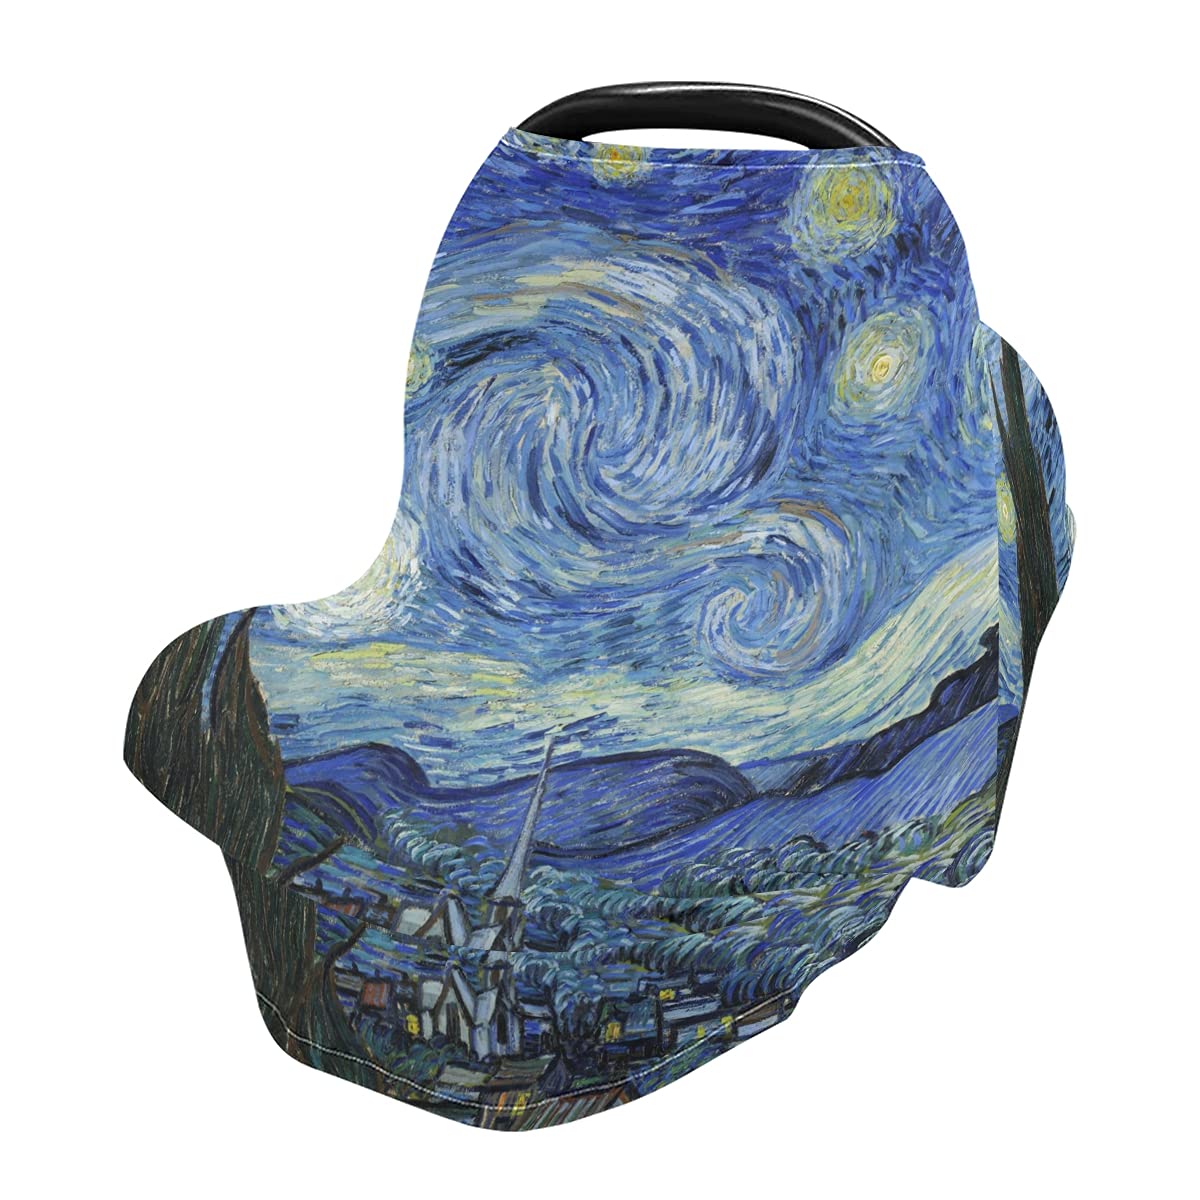 Van Gogh Starry Night Pattern Nursing Cover Breastfeeding Scarf, Stretchy Infant Carseat Canopy Multi-use Stroller Cover Car Seat Cover for Baby Girl Boy